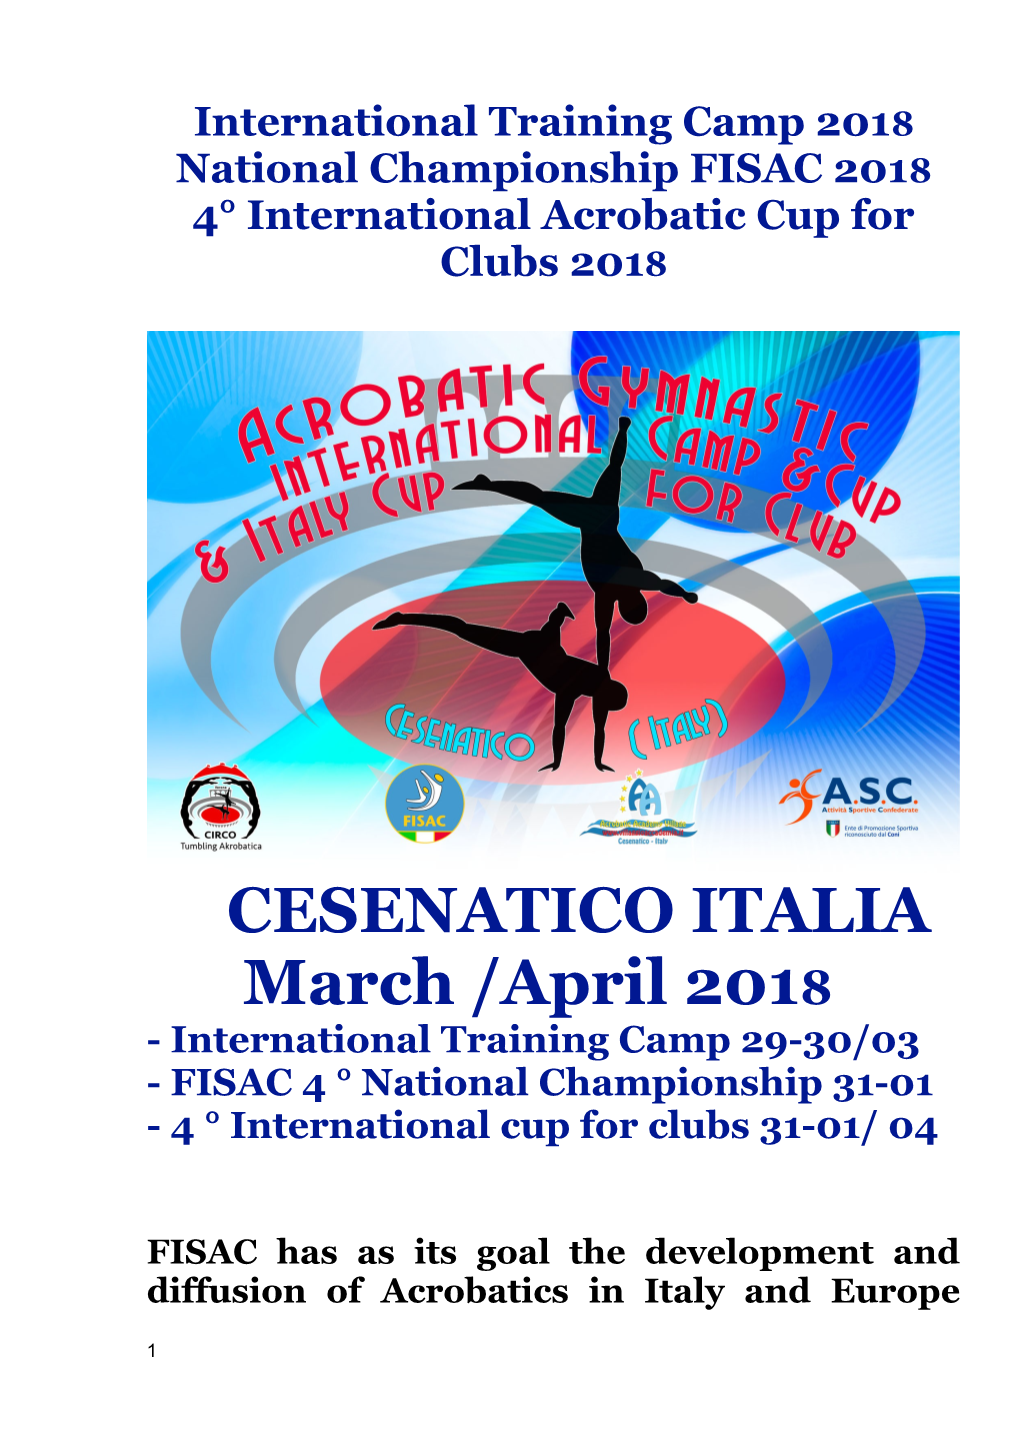 4 International Acrobatic Cup for Clubs 2018